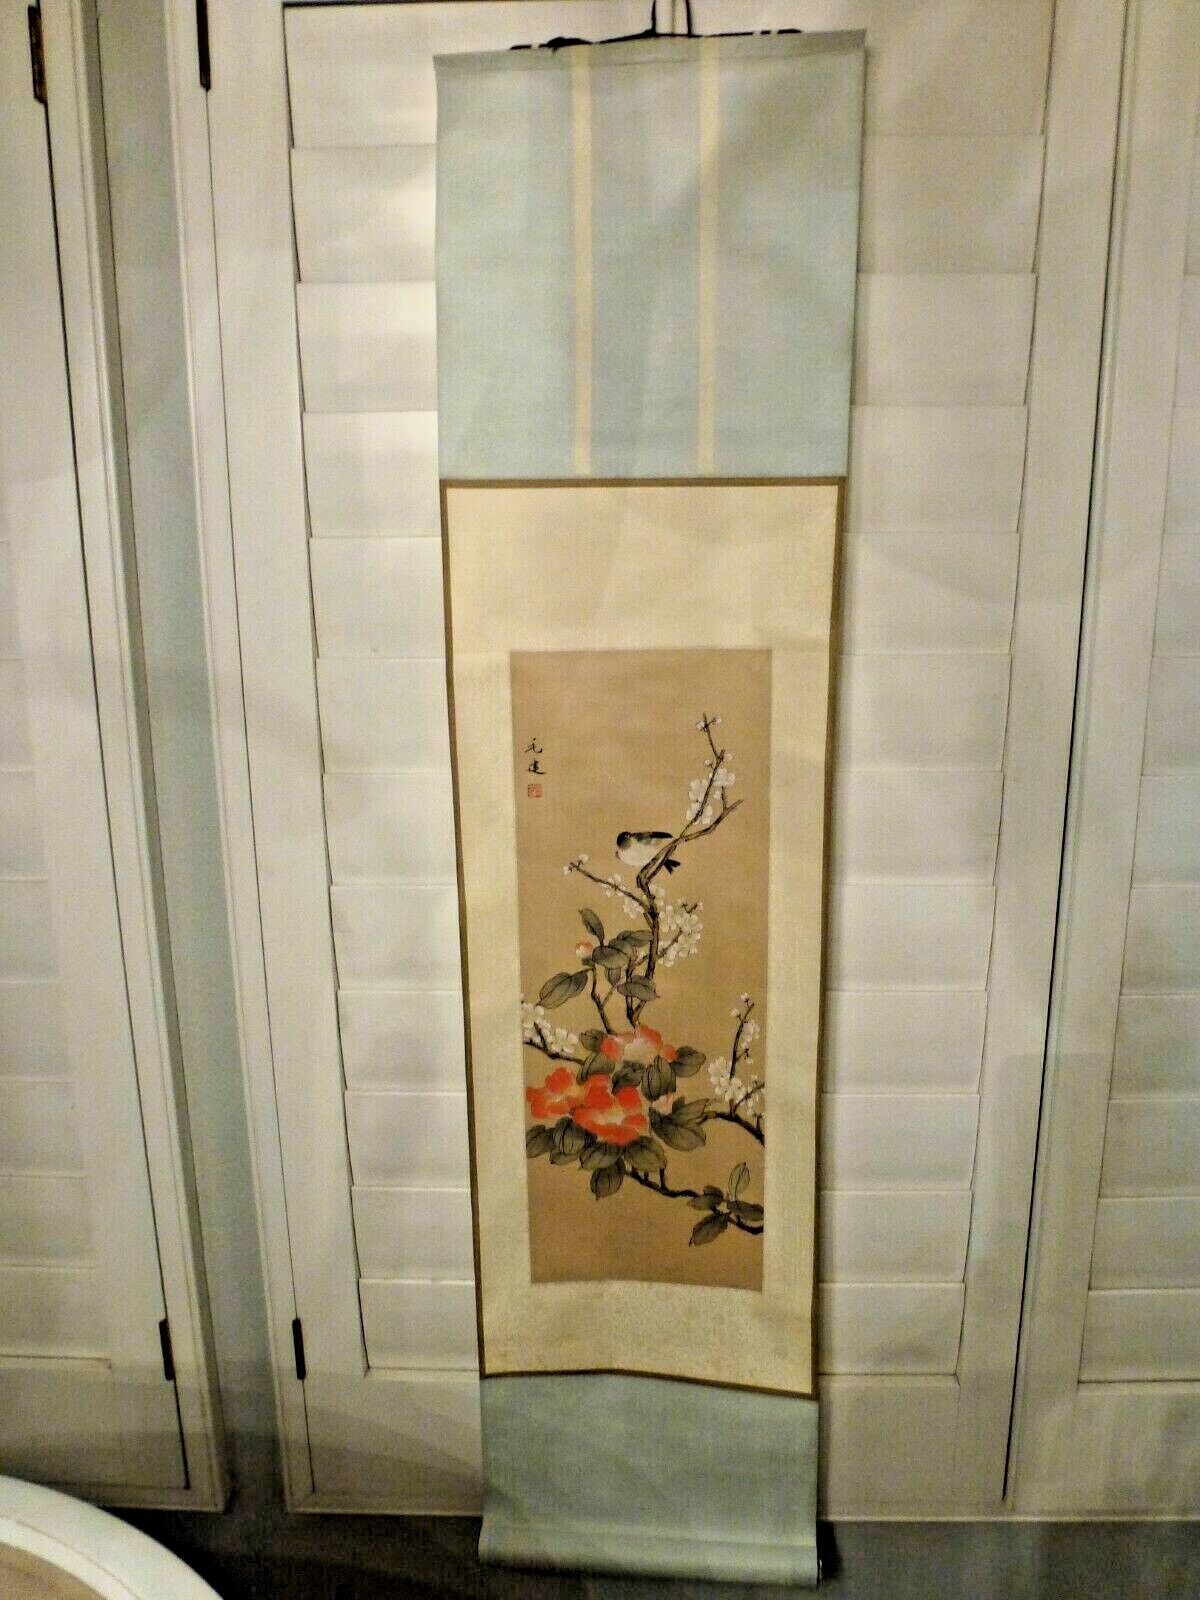 Chinese Birds Flowers Scroll Wall Hanging   13 x 52 "    with BOX   SIGNED 